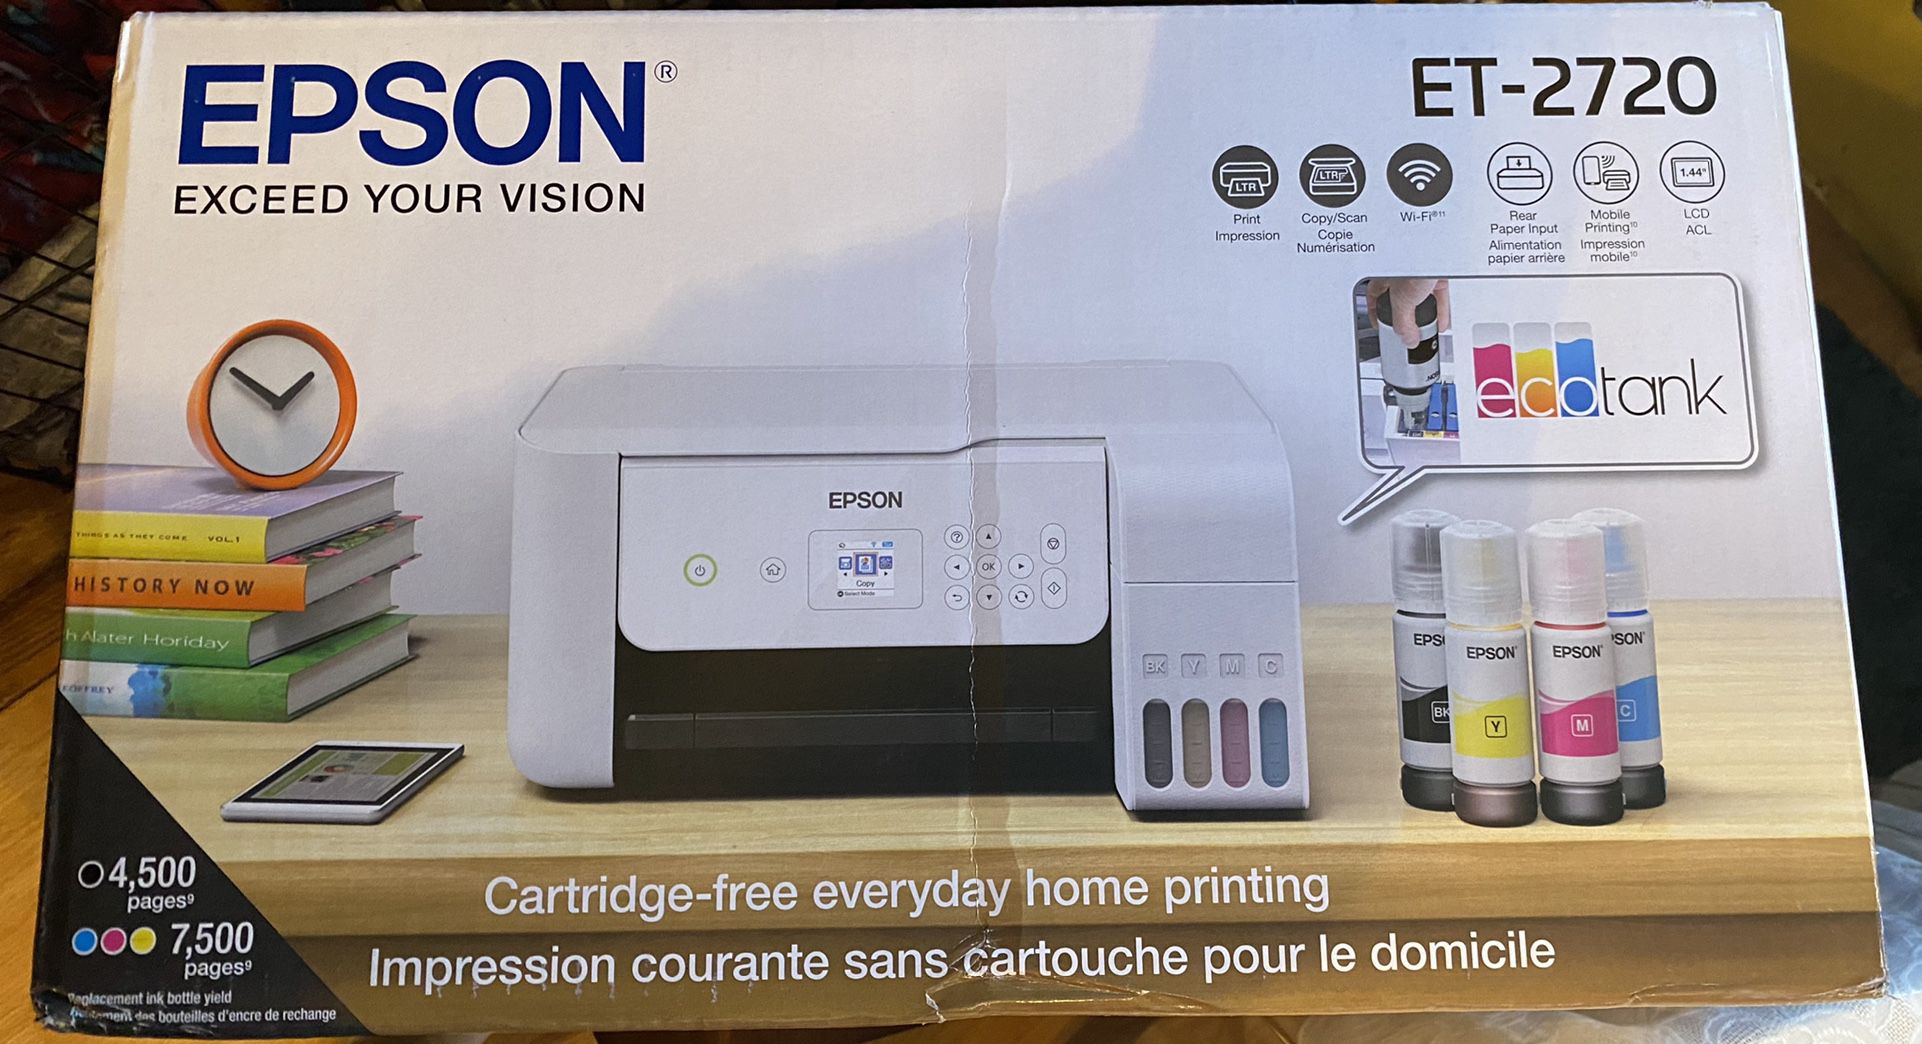 Brand New -- Epson 2720 All In 1 